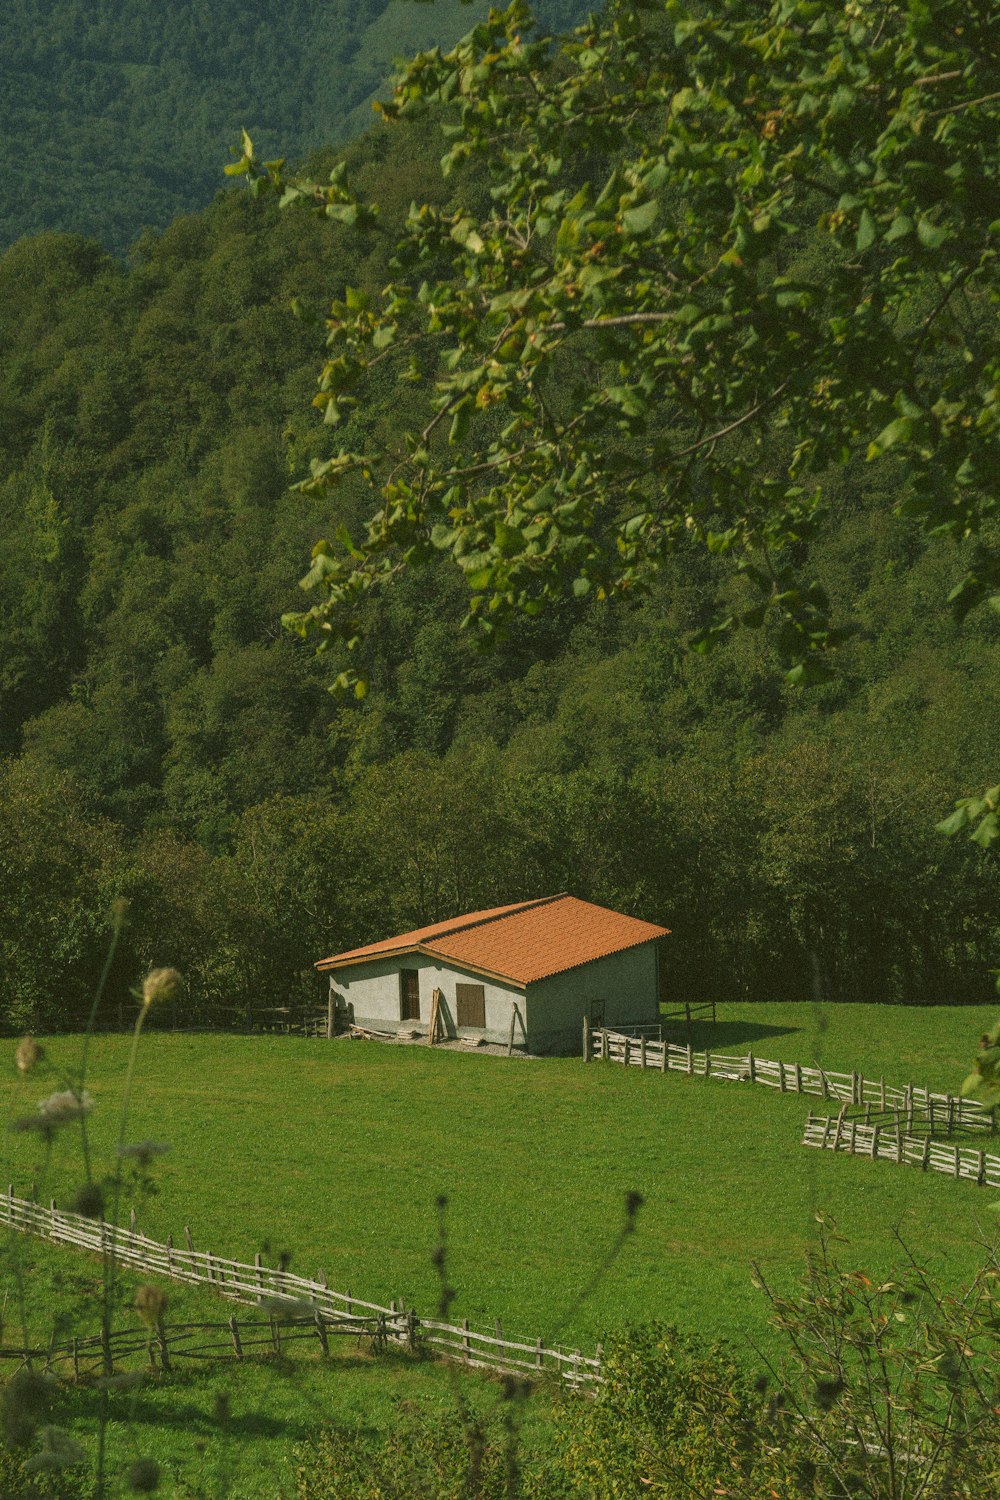 a barn in the middle of a lush green field